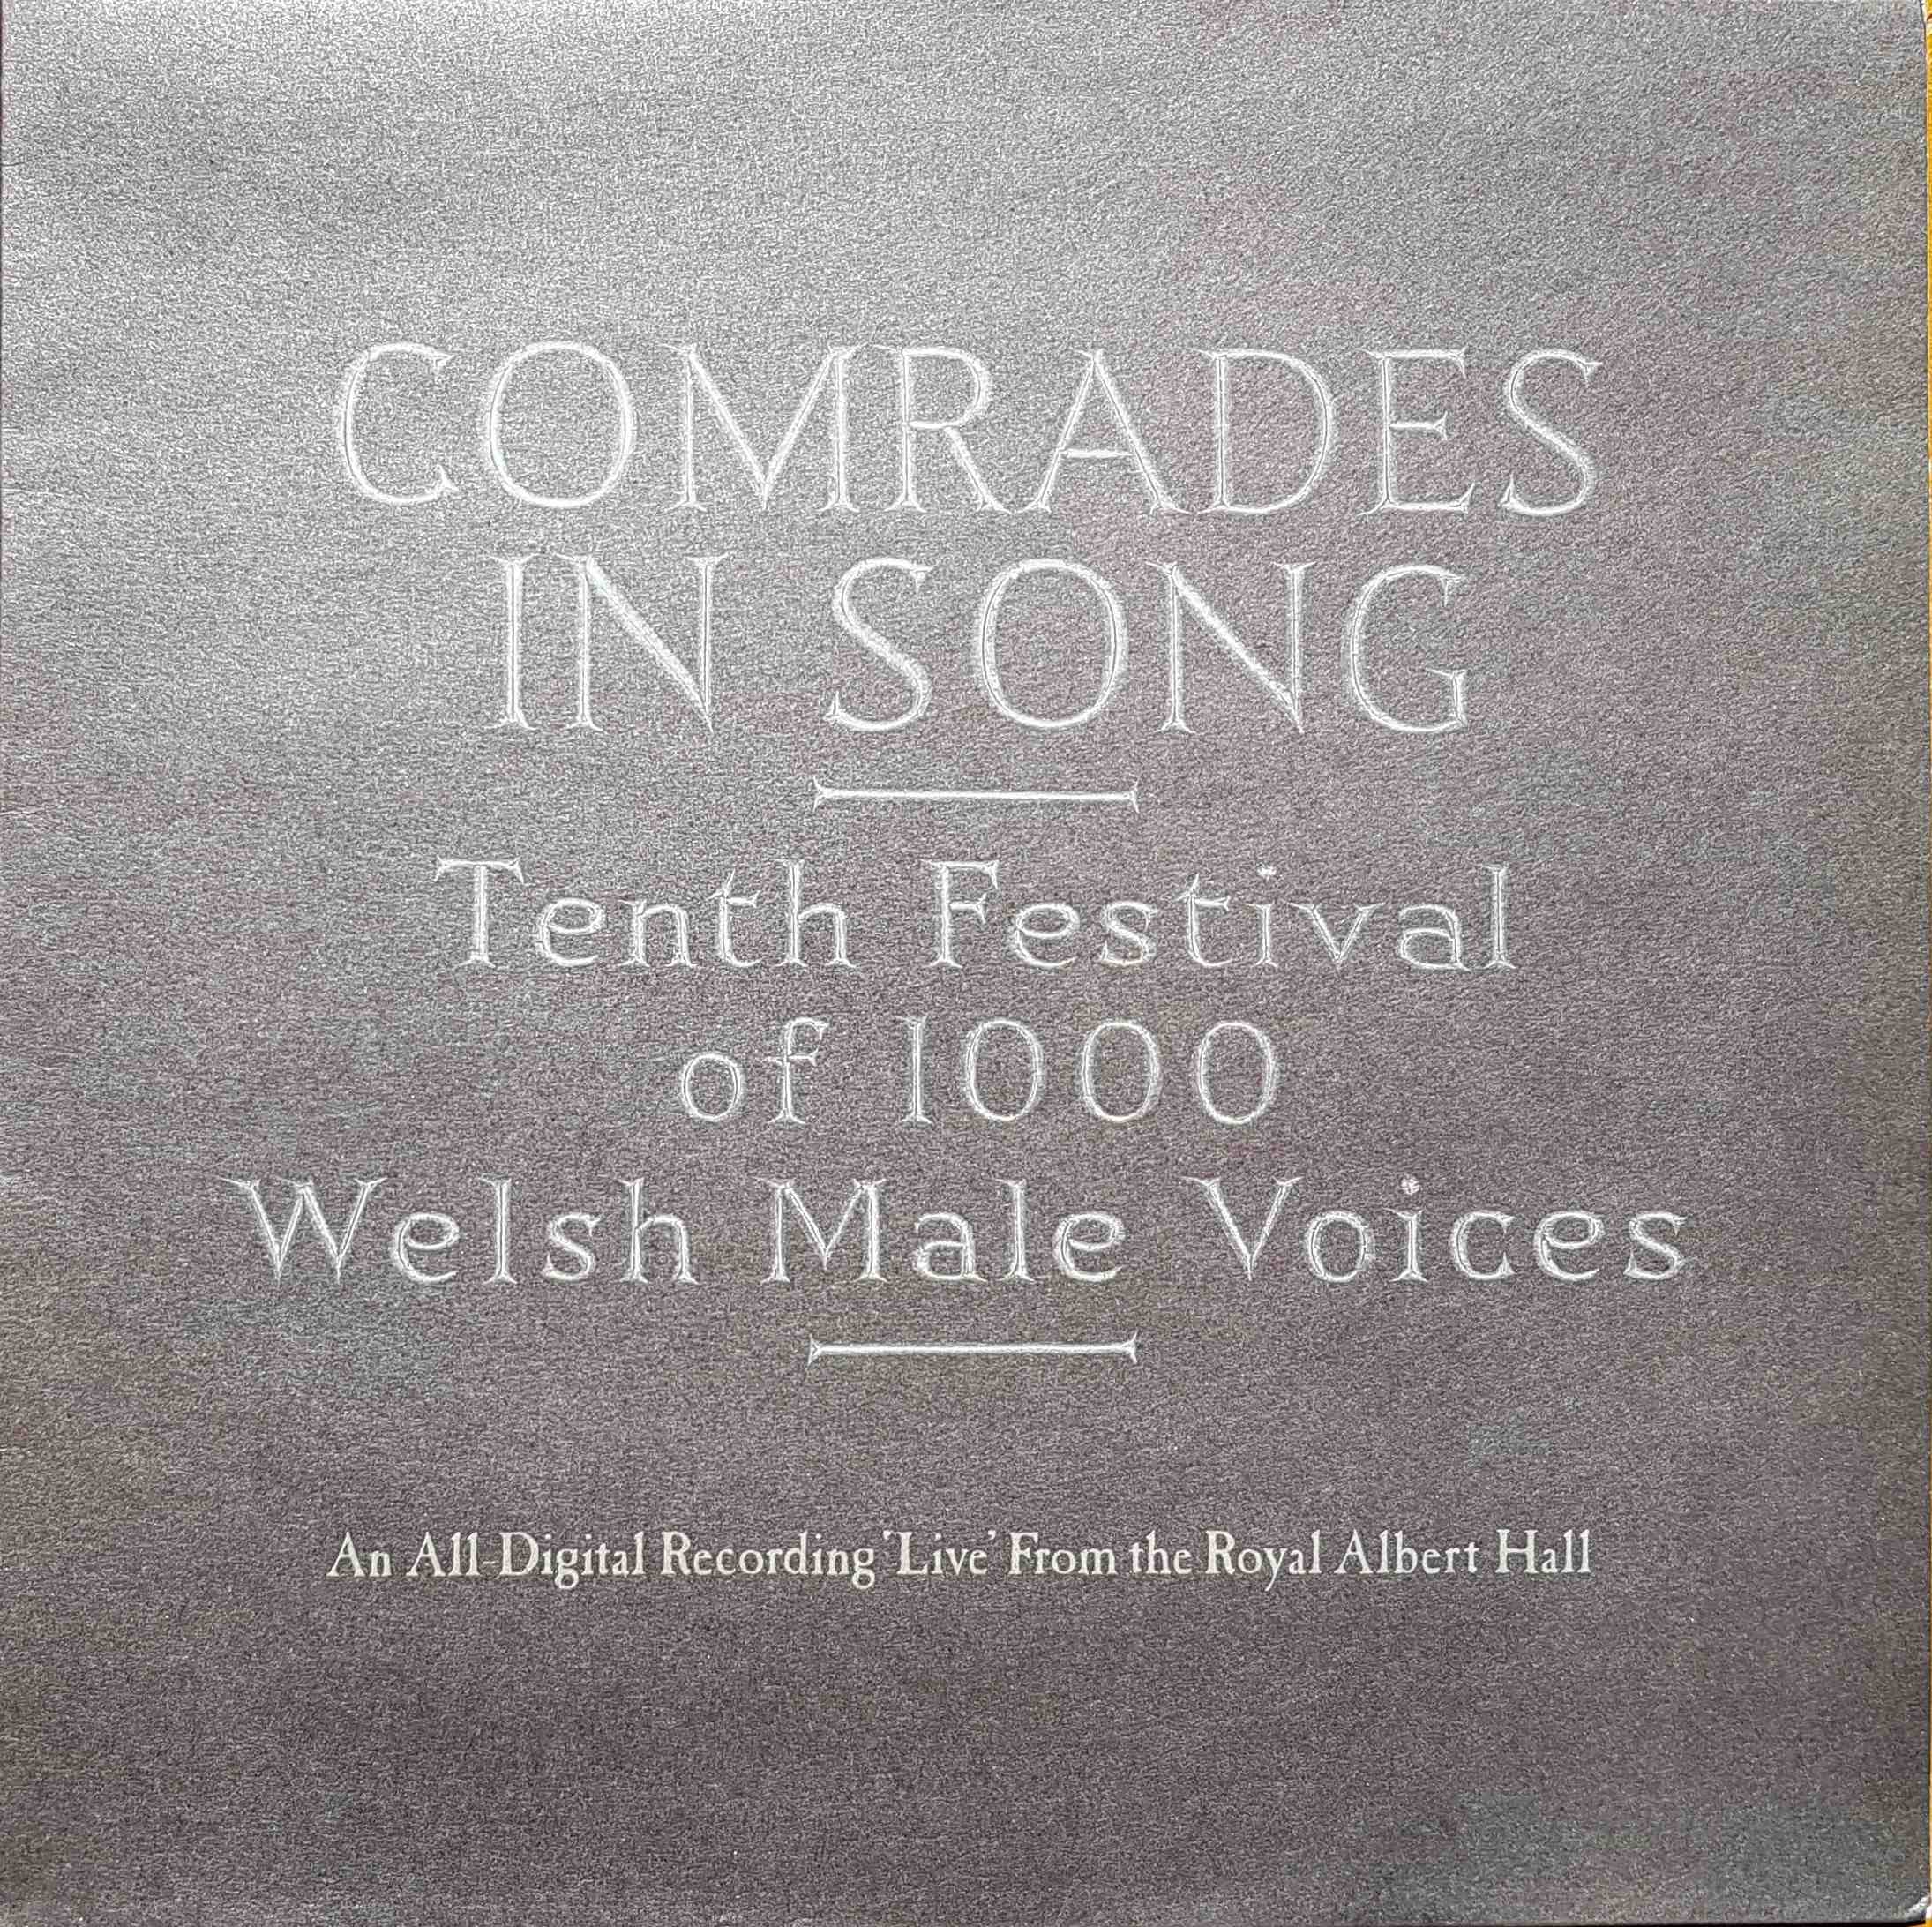 Picture of REH 630 Comrades in song  (W/L test pressing) by artist Various from the BBC albums - Records and Tapes library